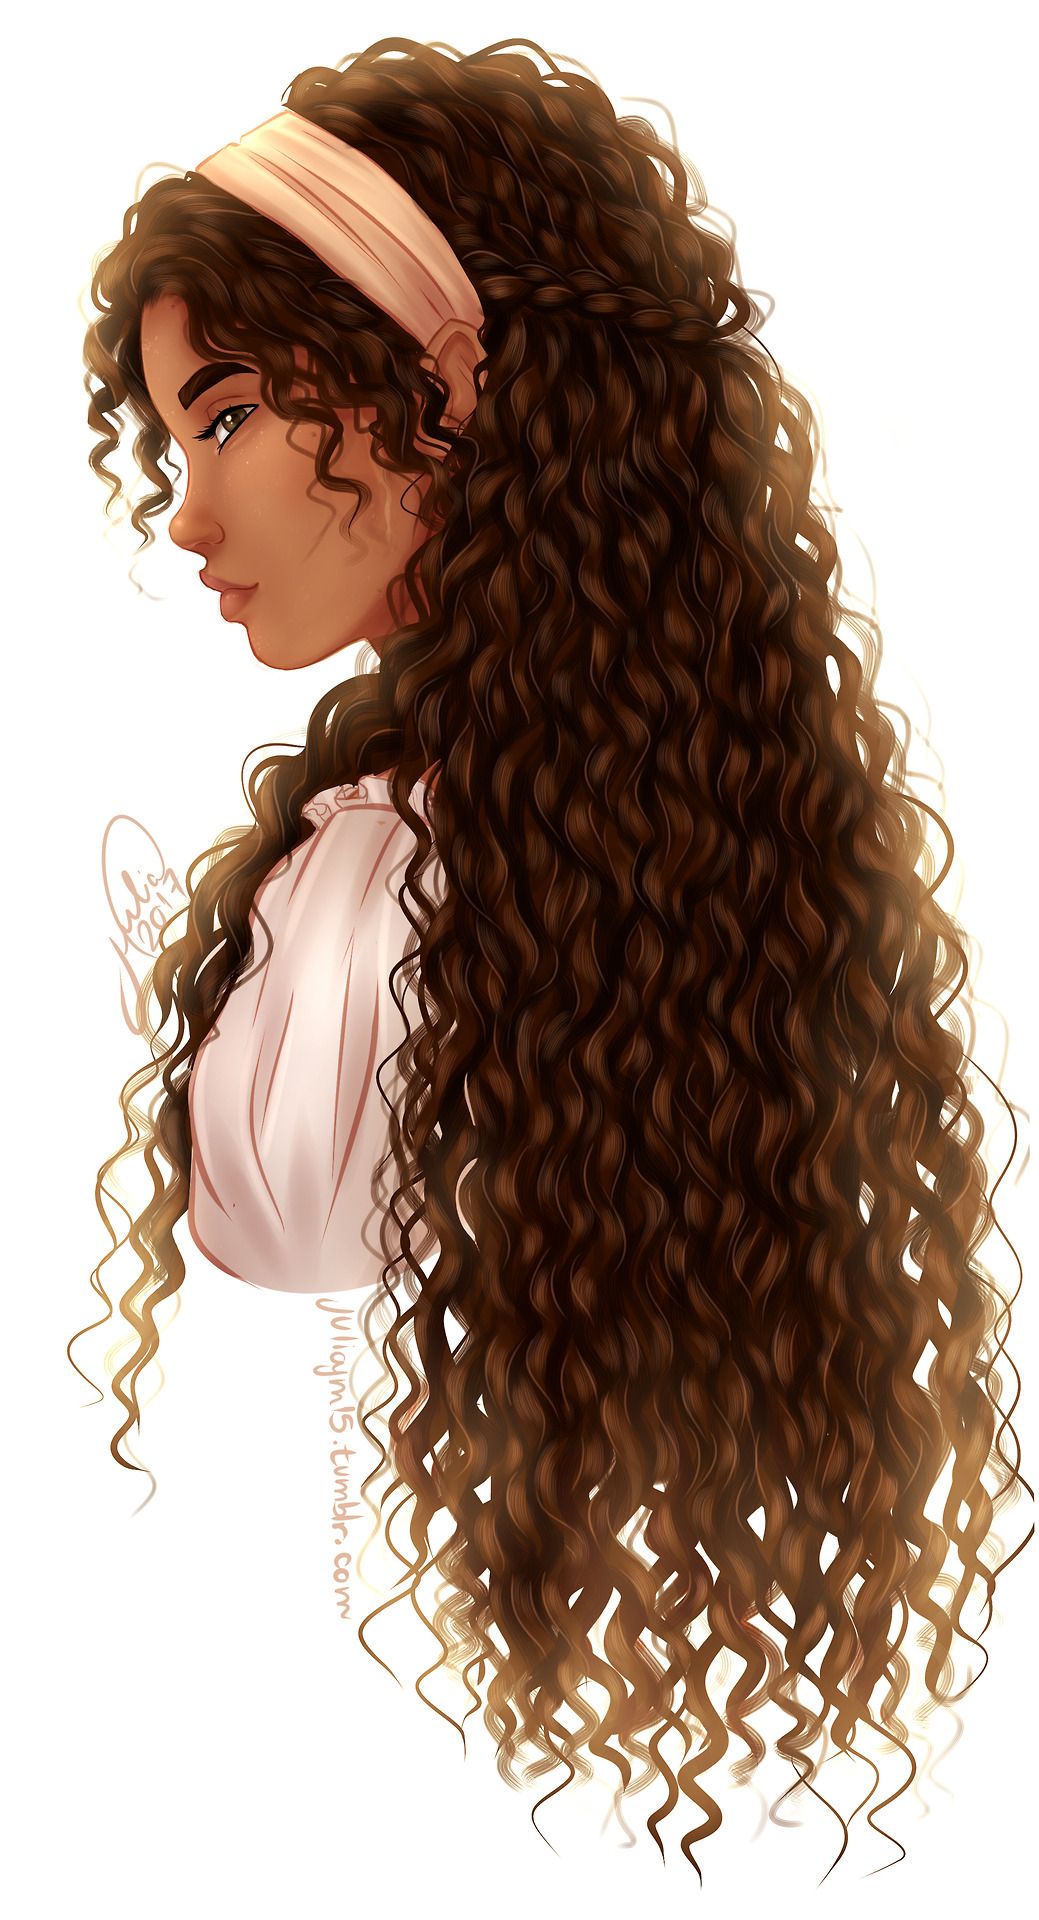 Cute Anime Girl With Brown Curly Hair